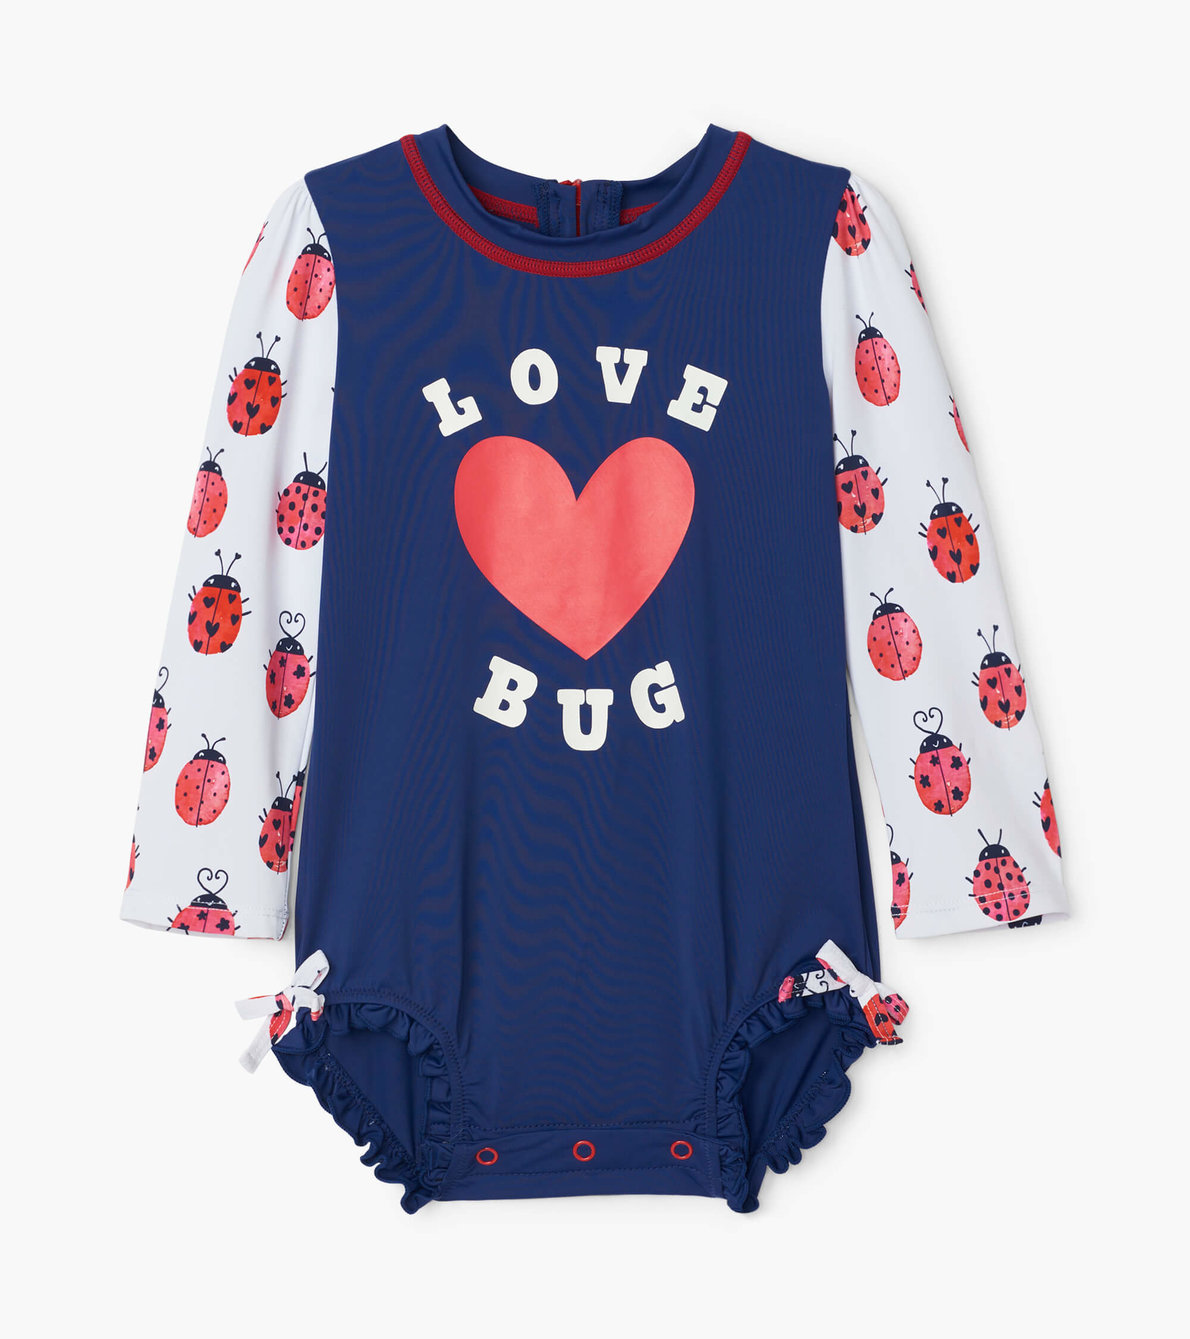 View larger image of Love Bugs Baby Rashguard Swimsuit